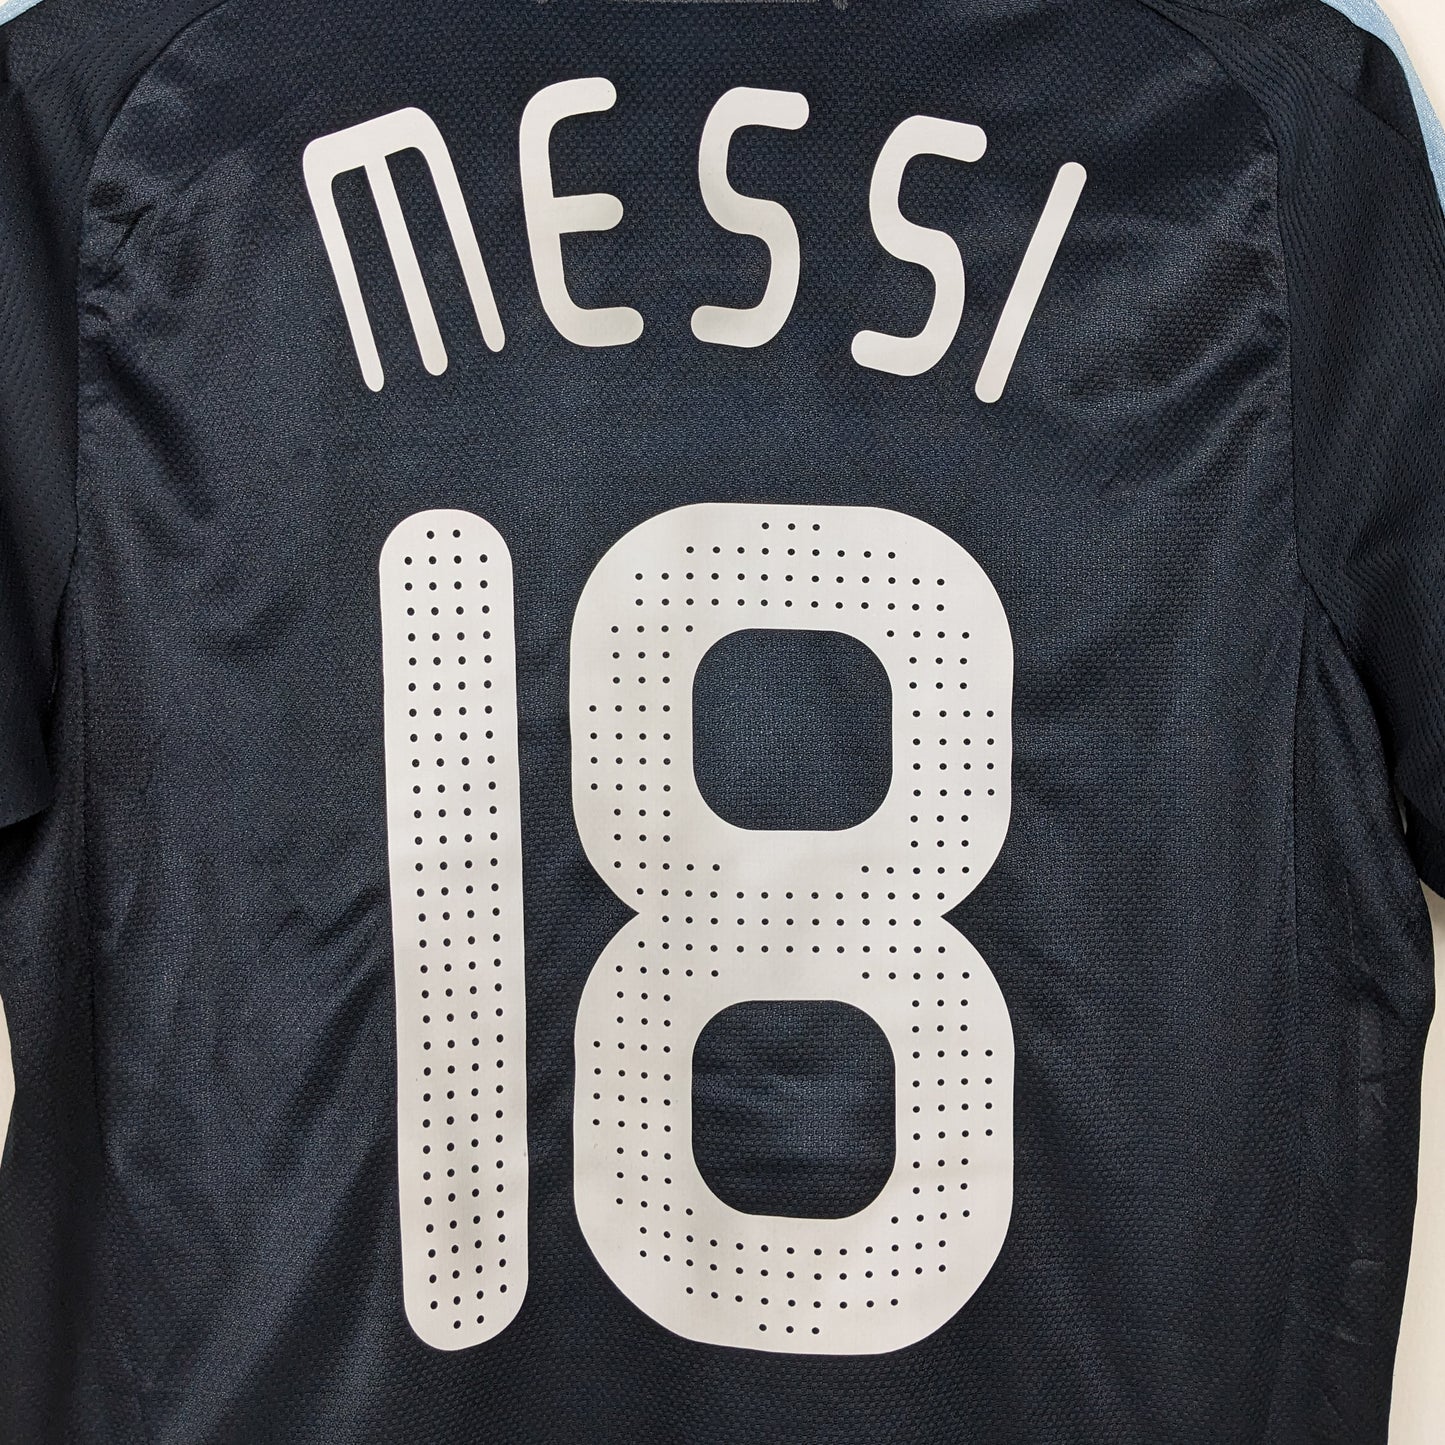 Authentic Argentina 2008 Away - Messi #10 Size M